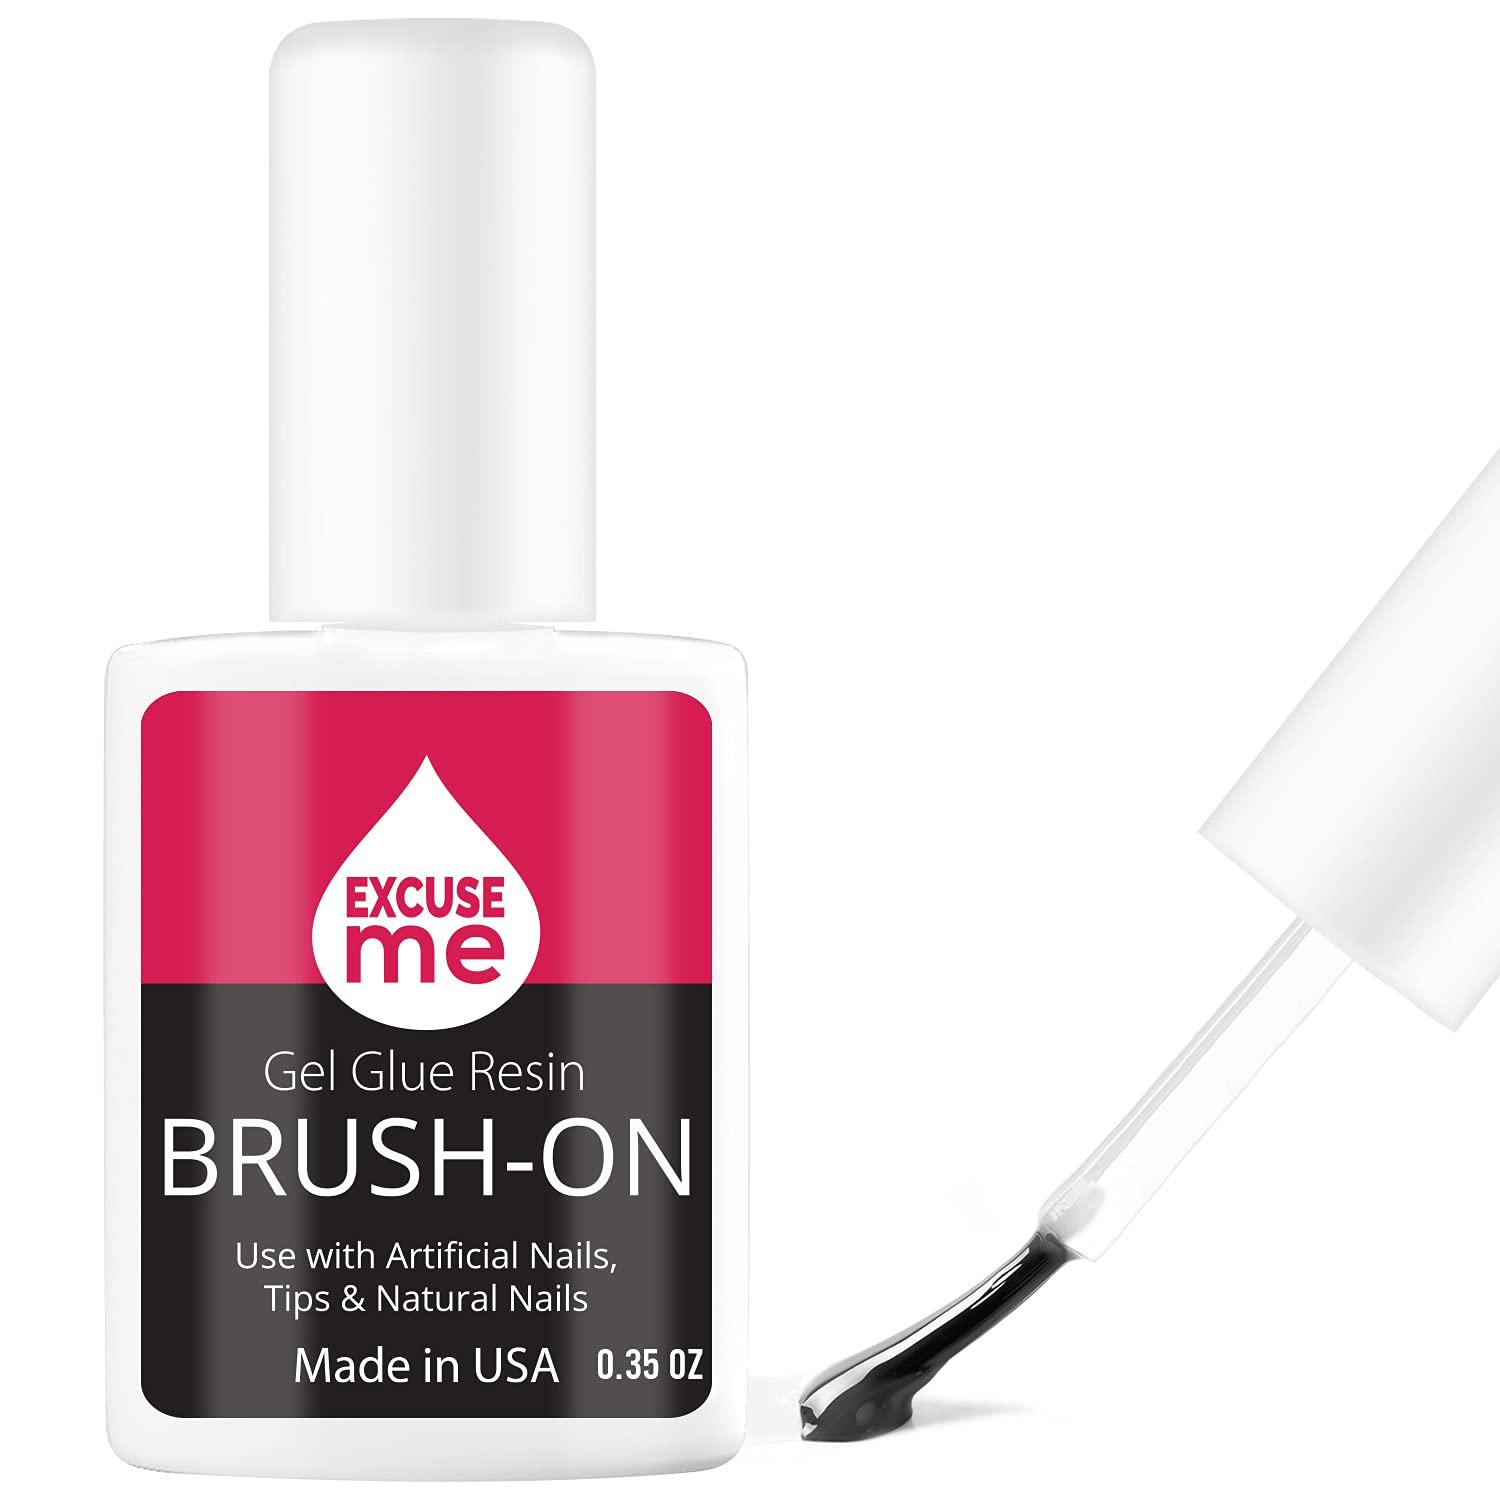 Excuse Me Brush On Gel Super Strong Nail Glue Adhesive for Repairs